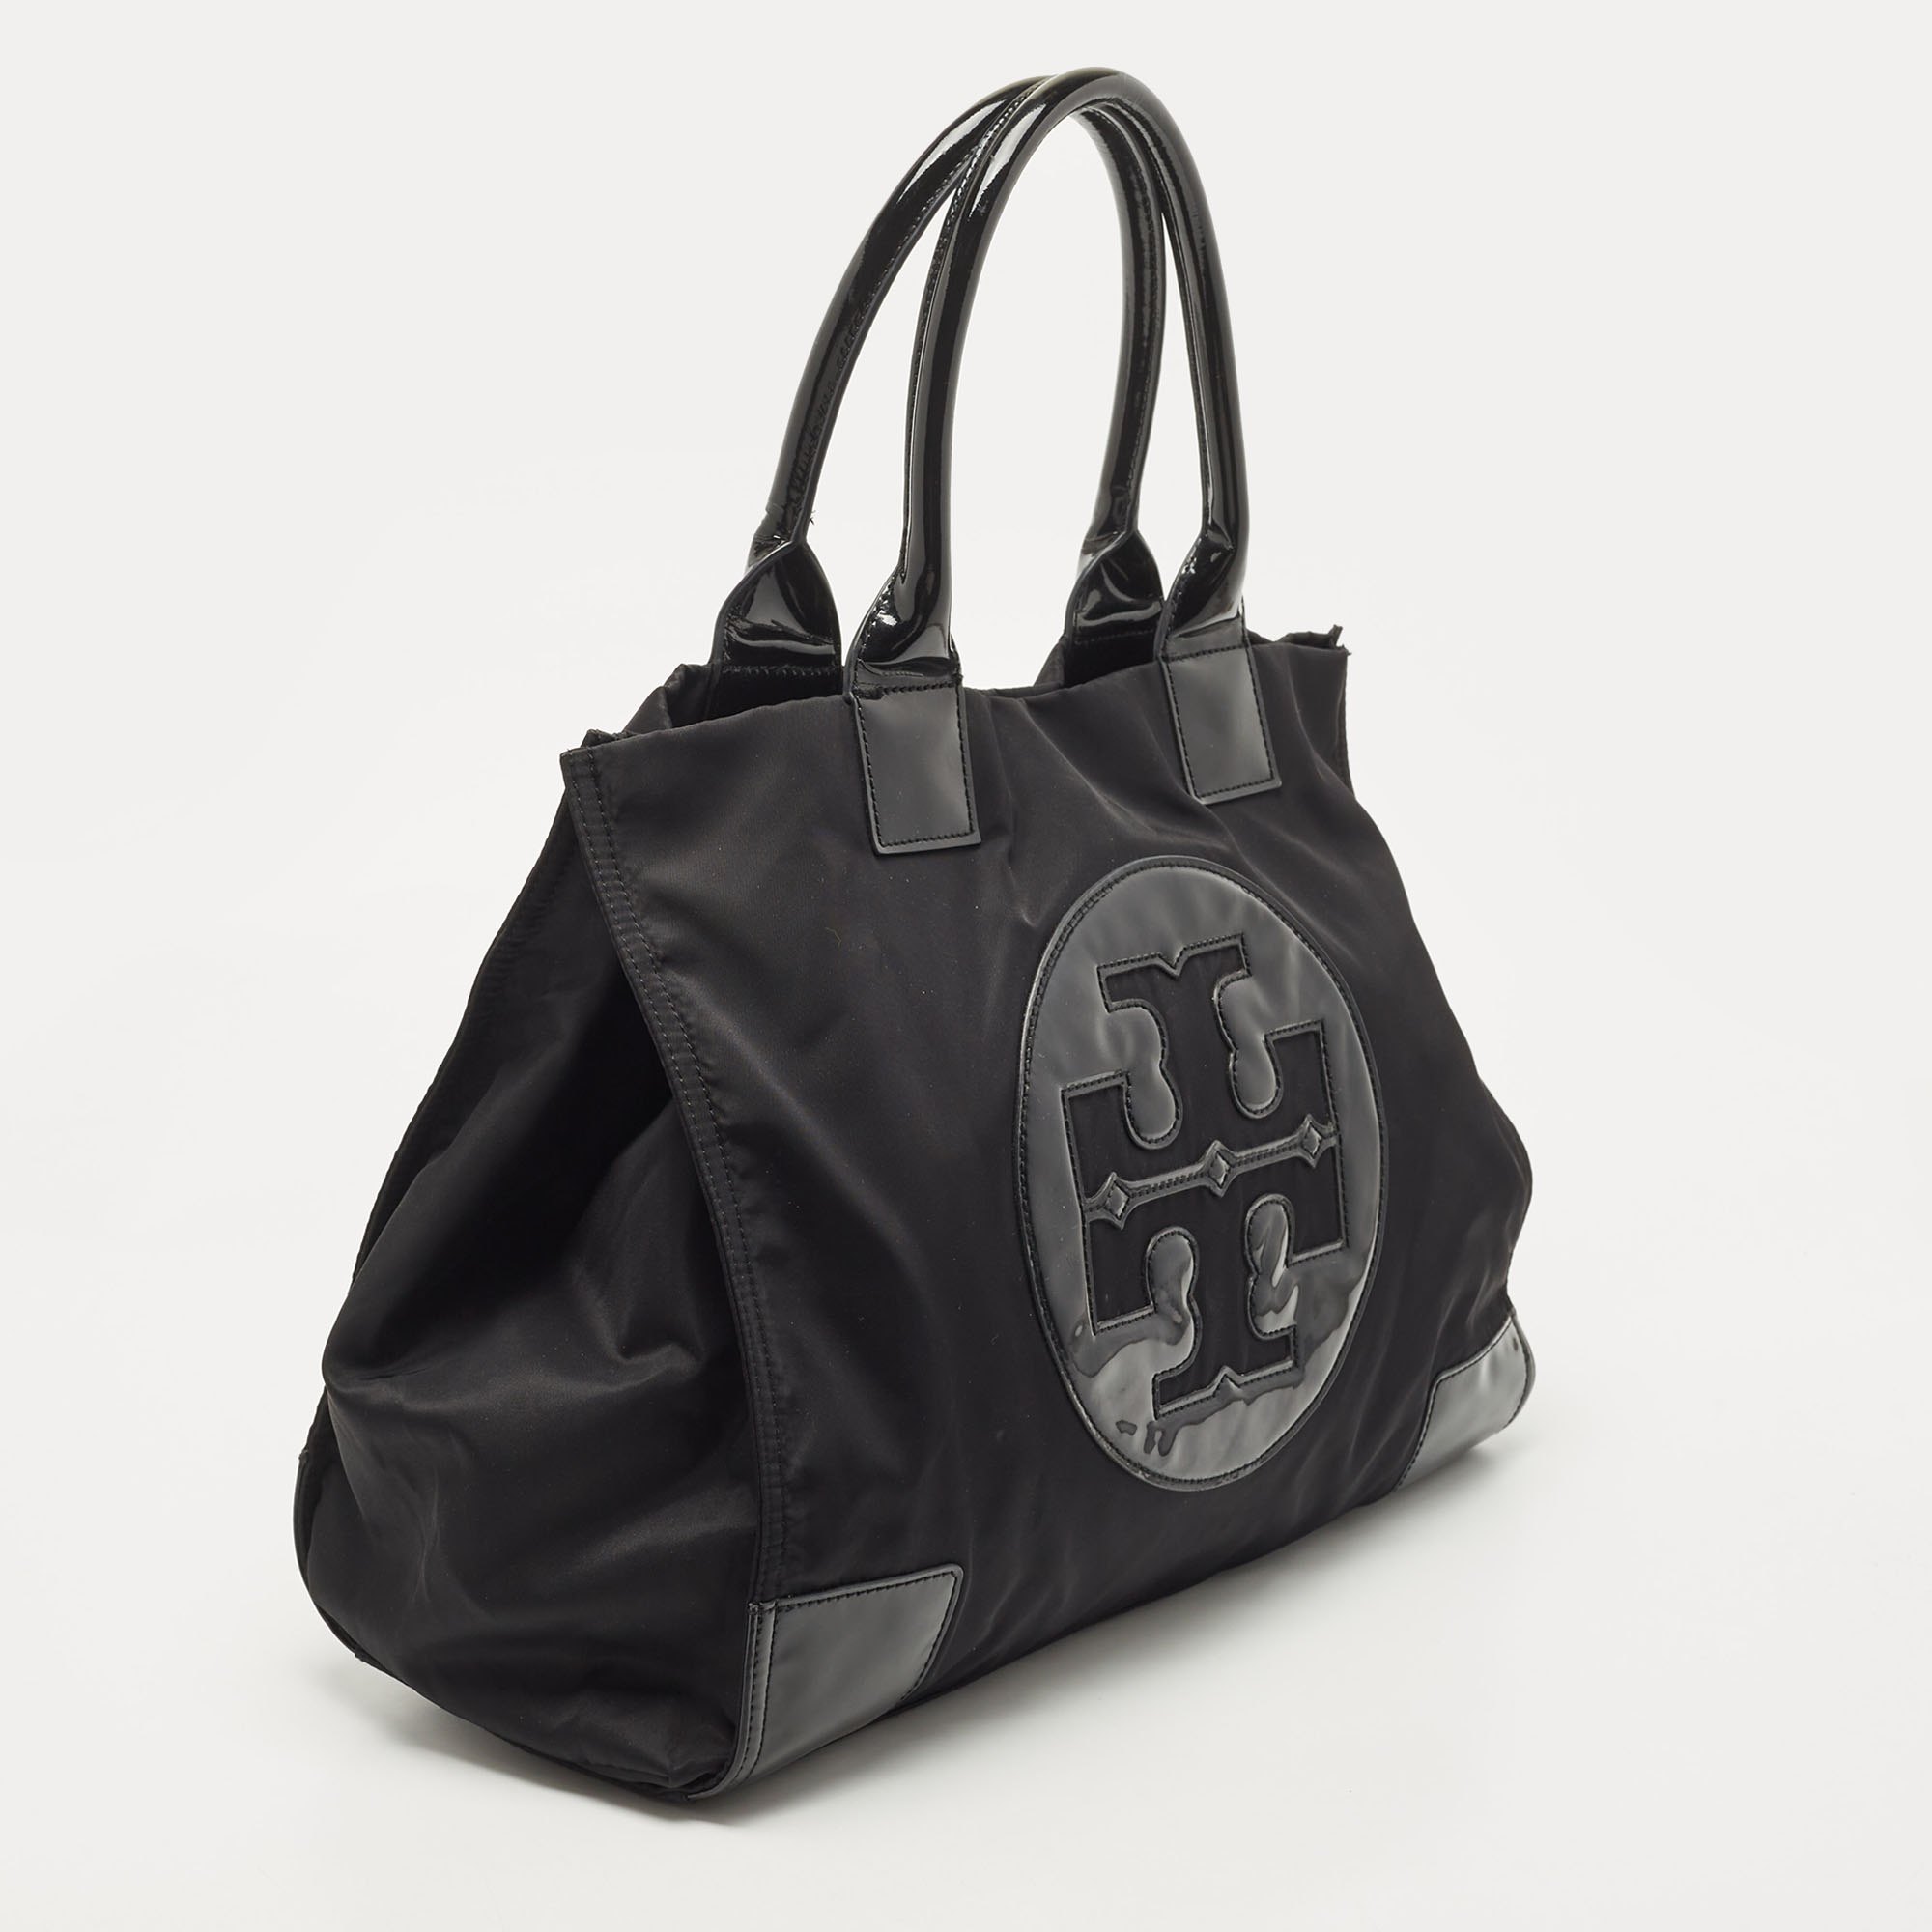 Tory Burch Black Patent Leather And Nylon Large Ella Tote